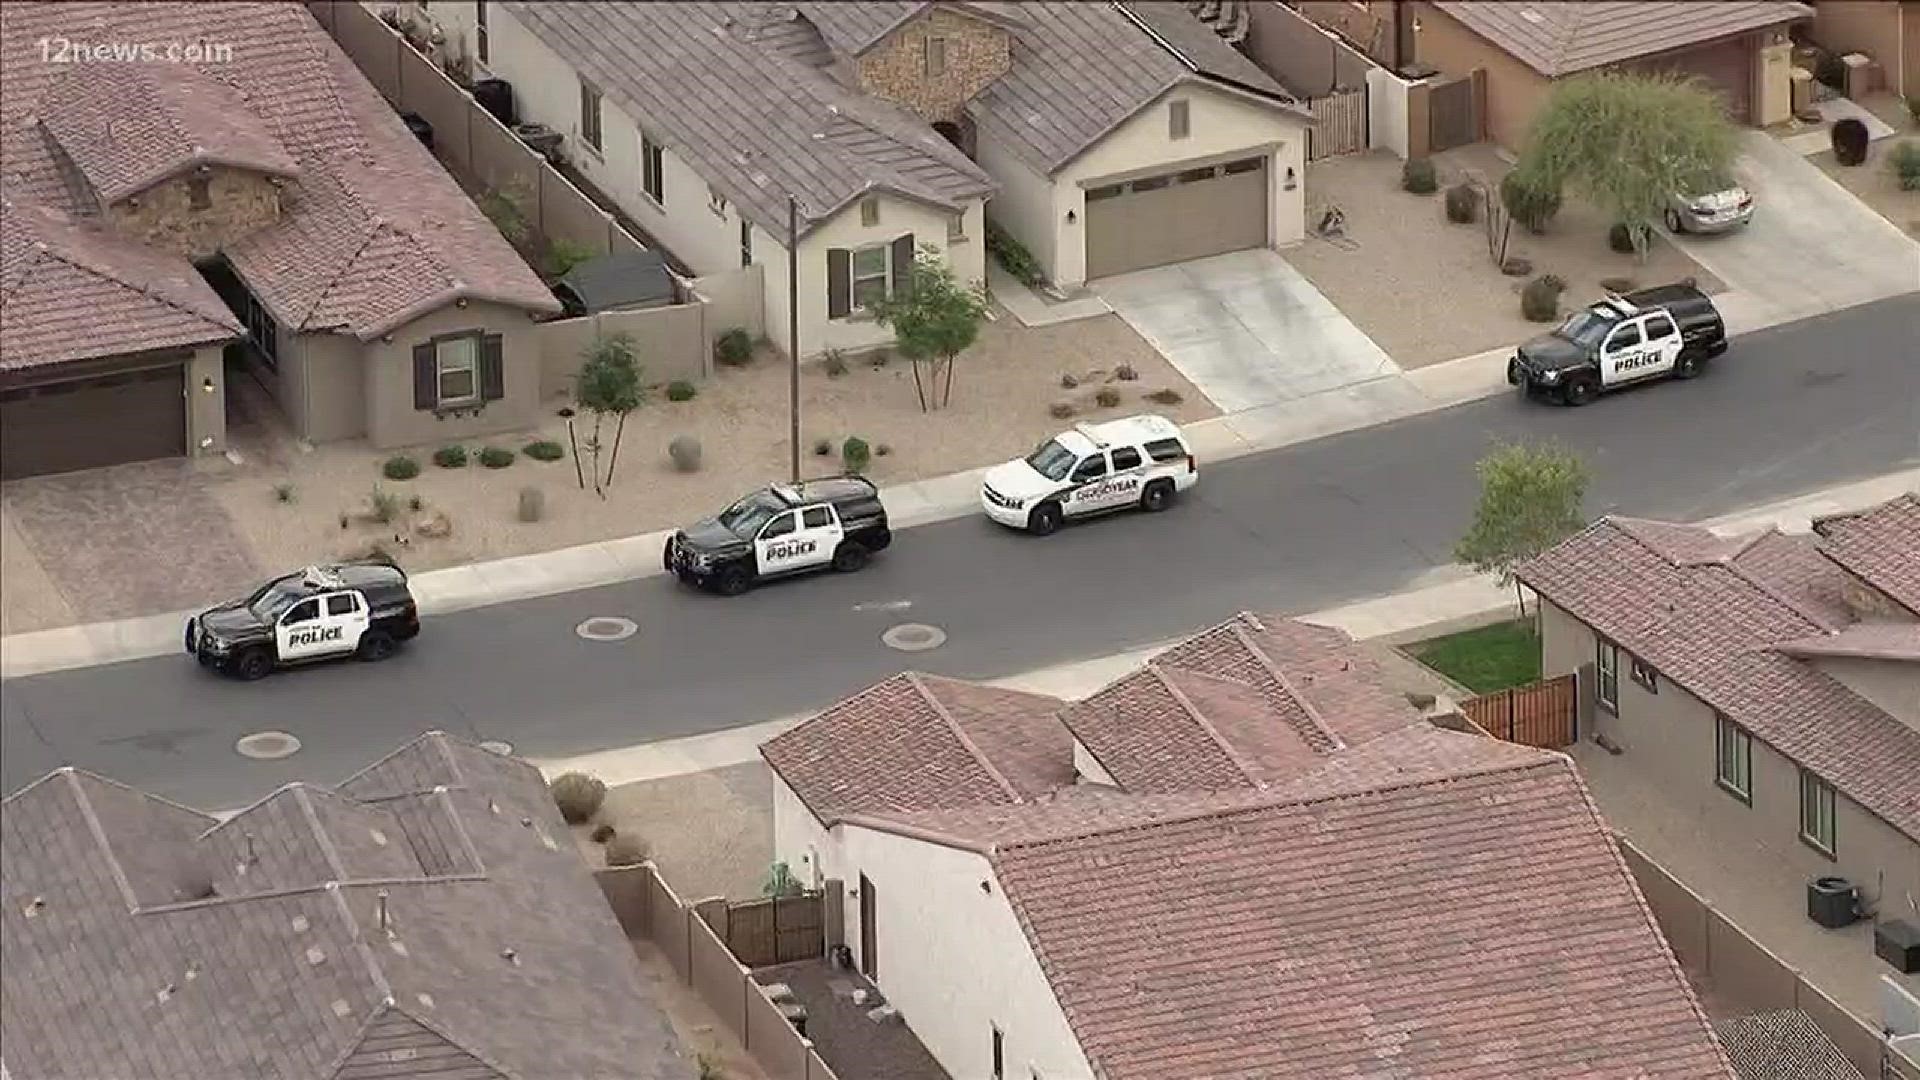 Police said two officers were injured responding to a call of multiple home burglaries in Goodyear near McDowell Road and Pebble Creek Parkway.